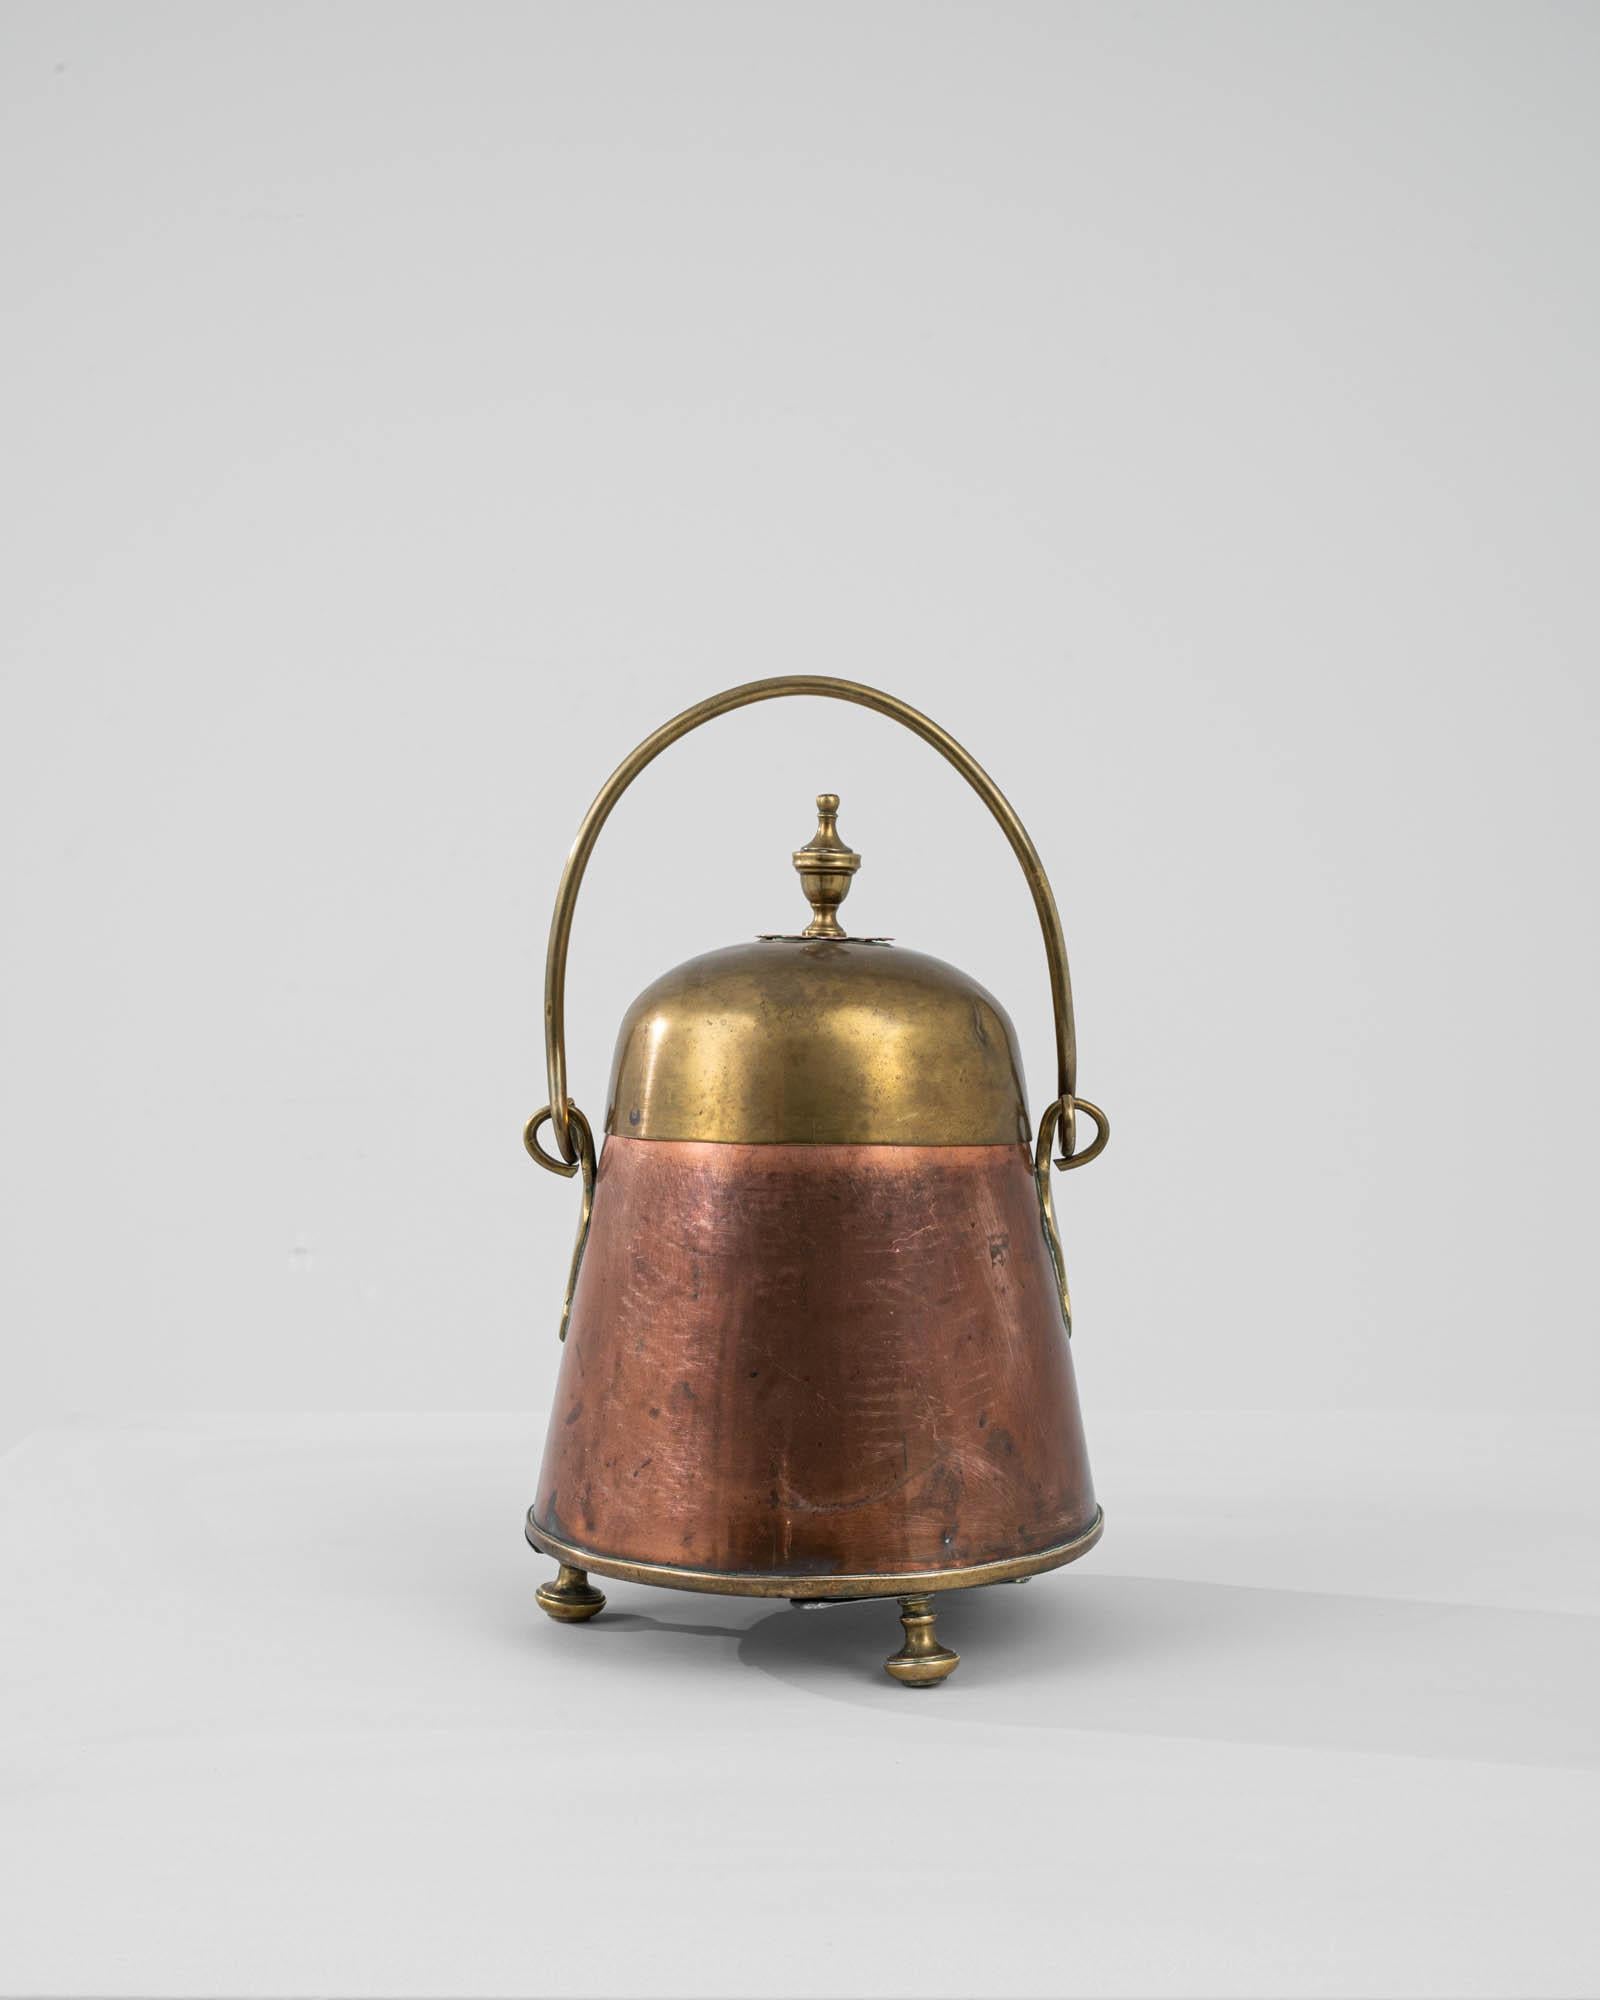 Transport yourself to the 19th century with this antique French Copper and Brass Pot, reminiscent of a Dutch 'doofpot.' Originally designed to store unburned wood or other fuel, these pots played a crucial role in preventing fires in medieval Dutch